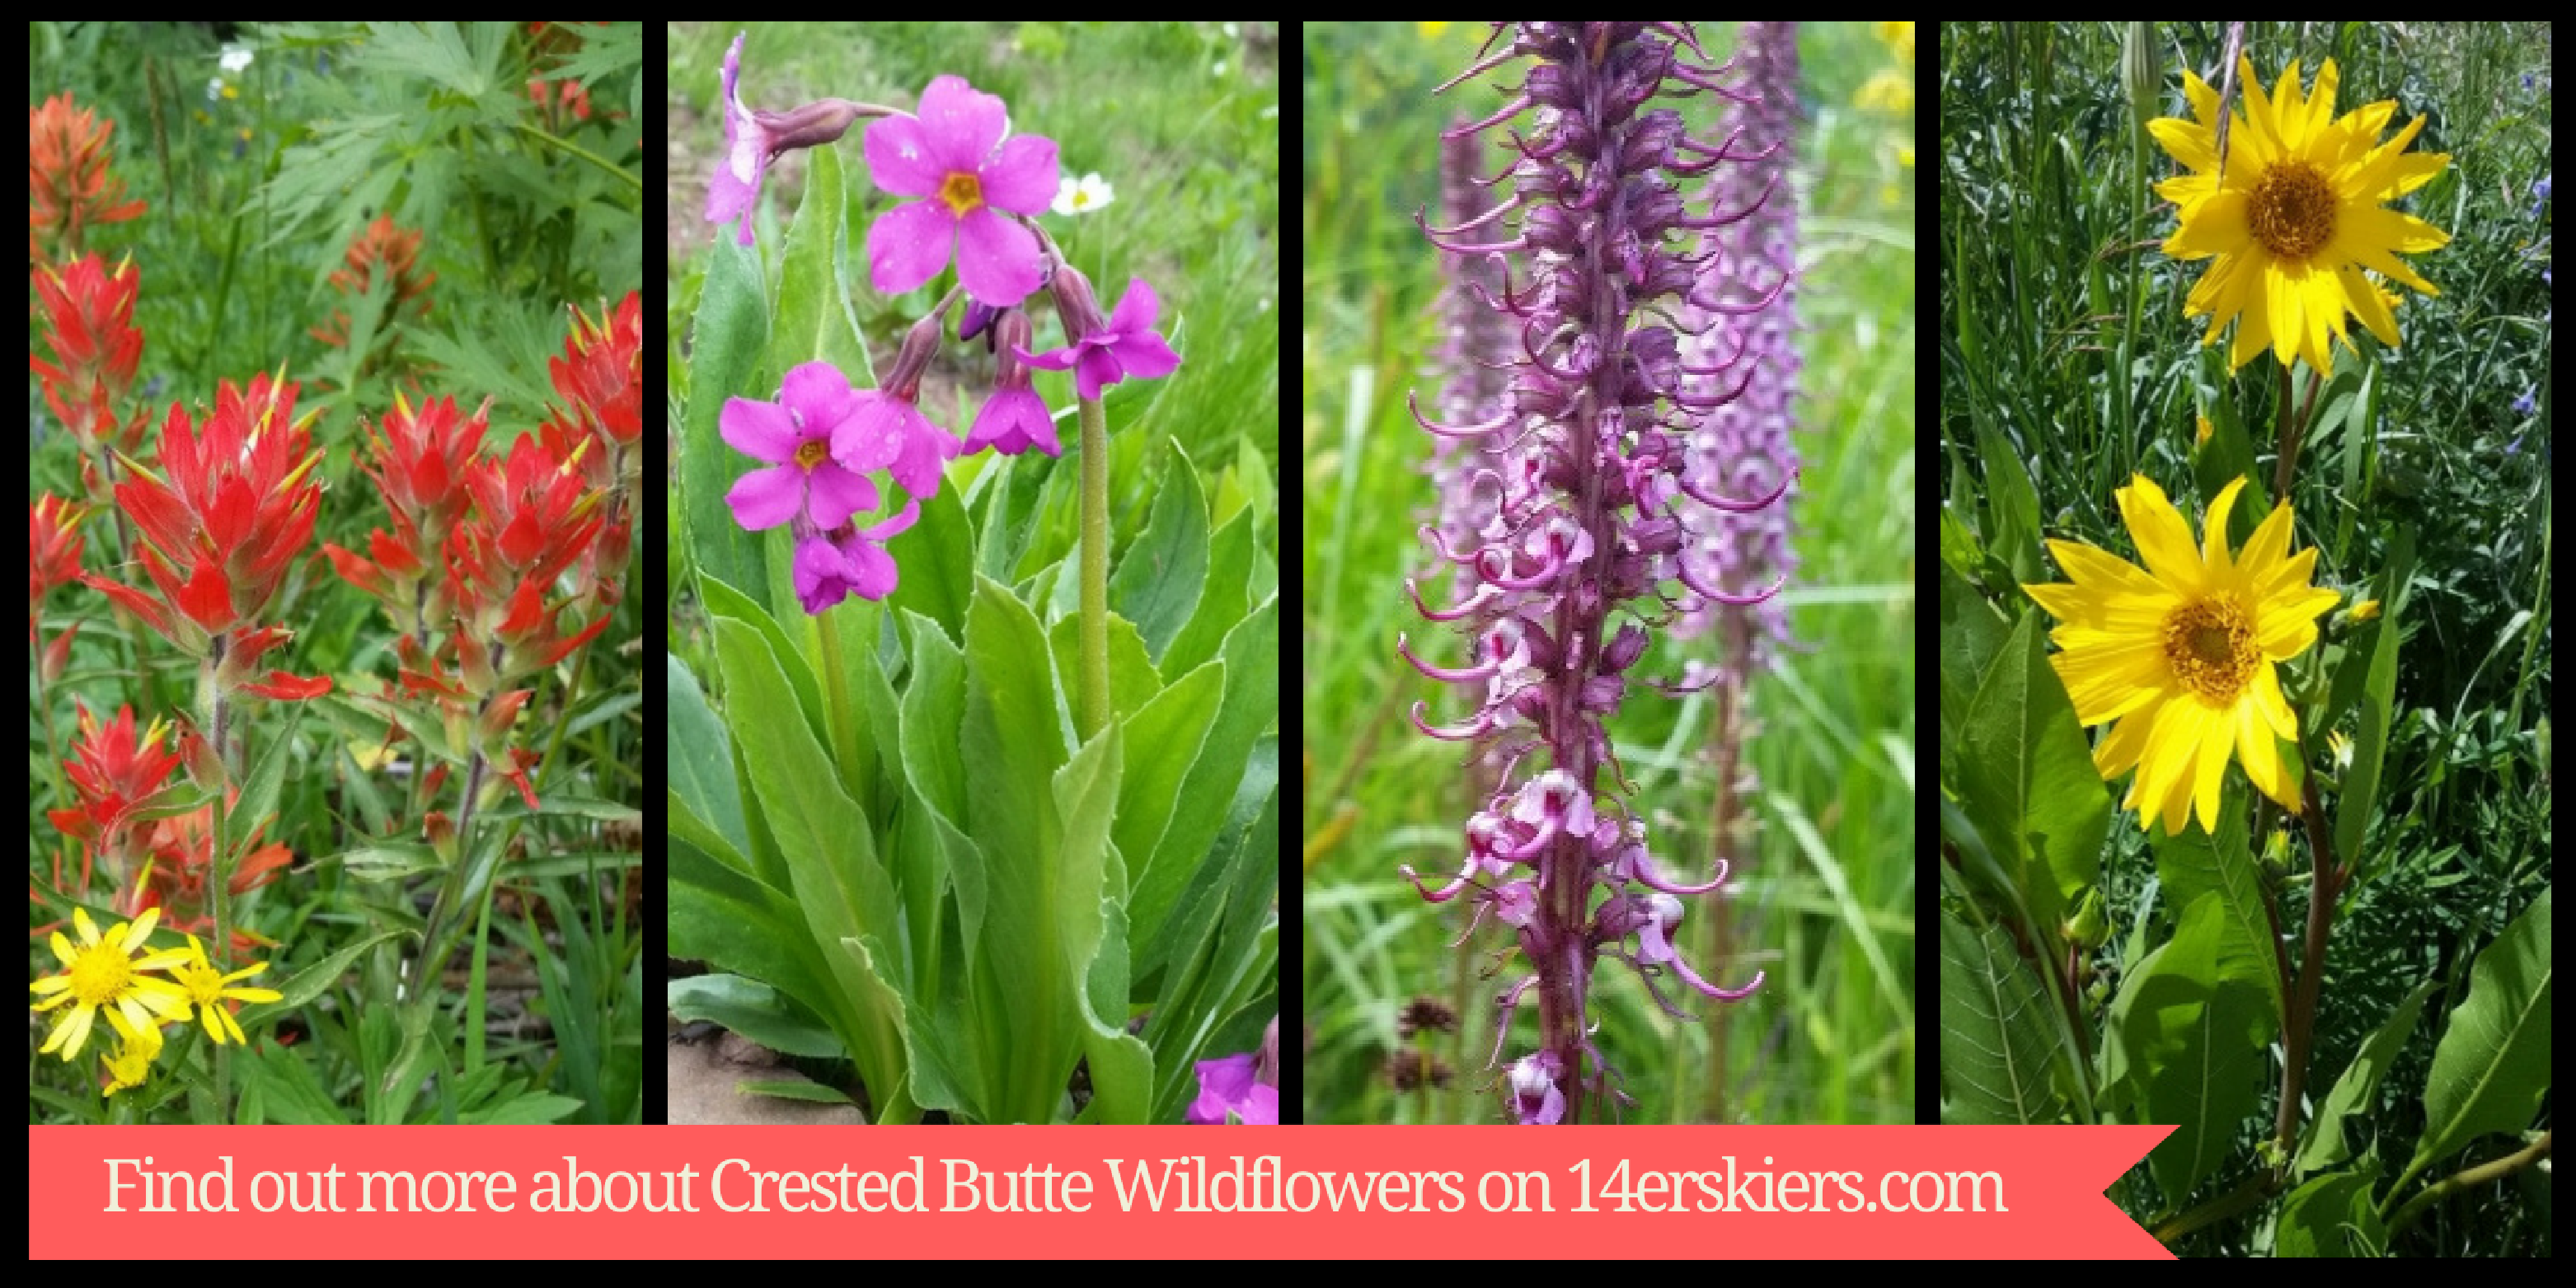 Introducing our Guide to Crested Butte Wildflowers